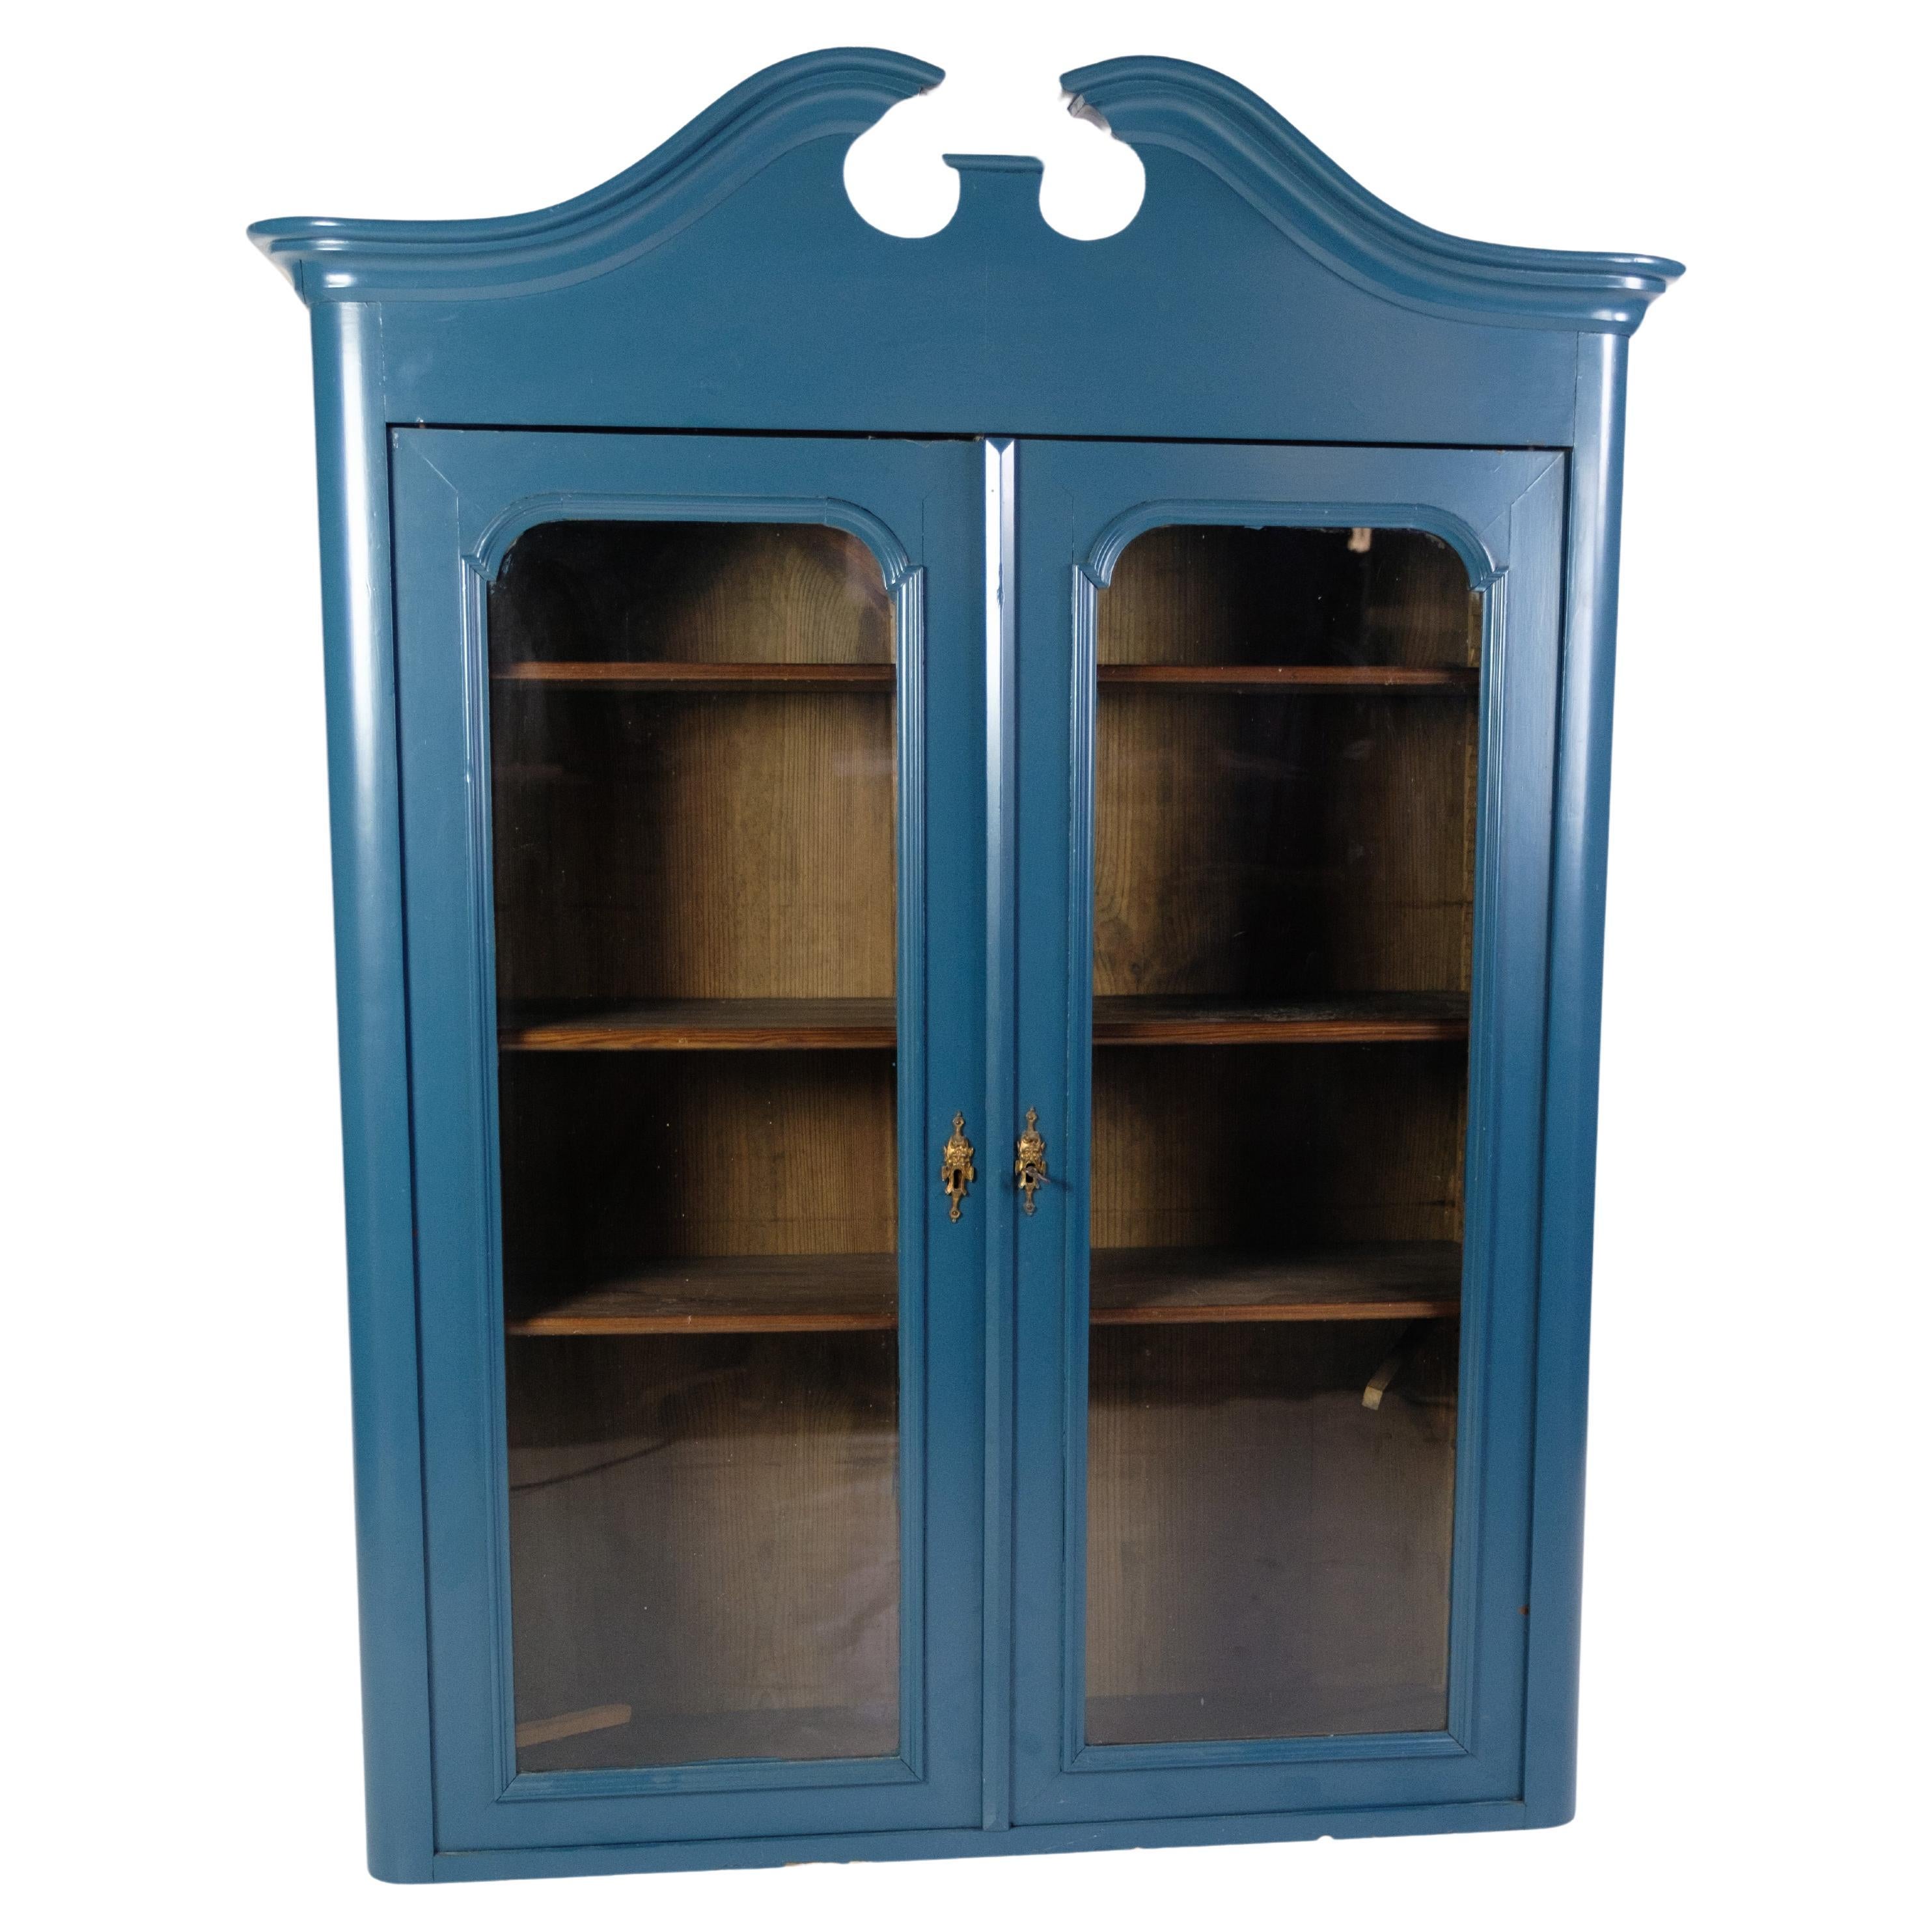 Antique Display Cabinet/Vitrine Painted In Blue From 1920s For Sale